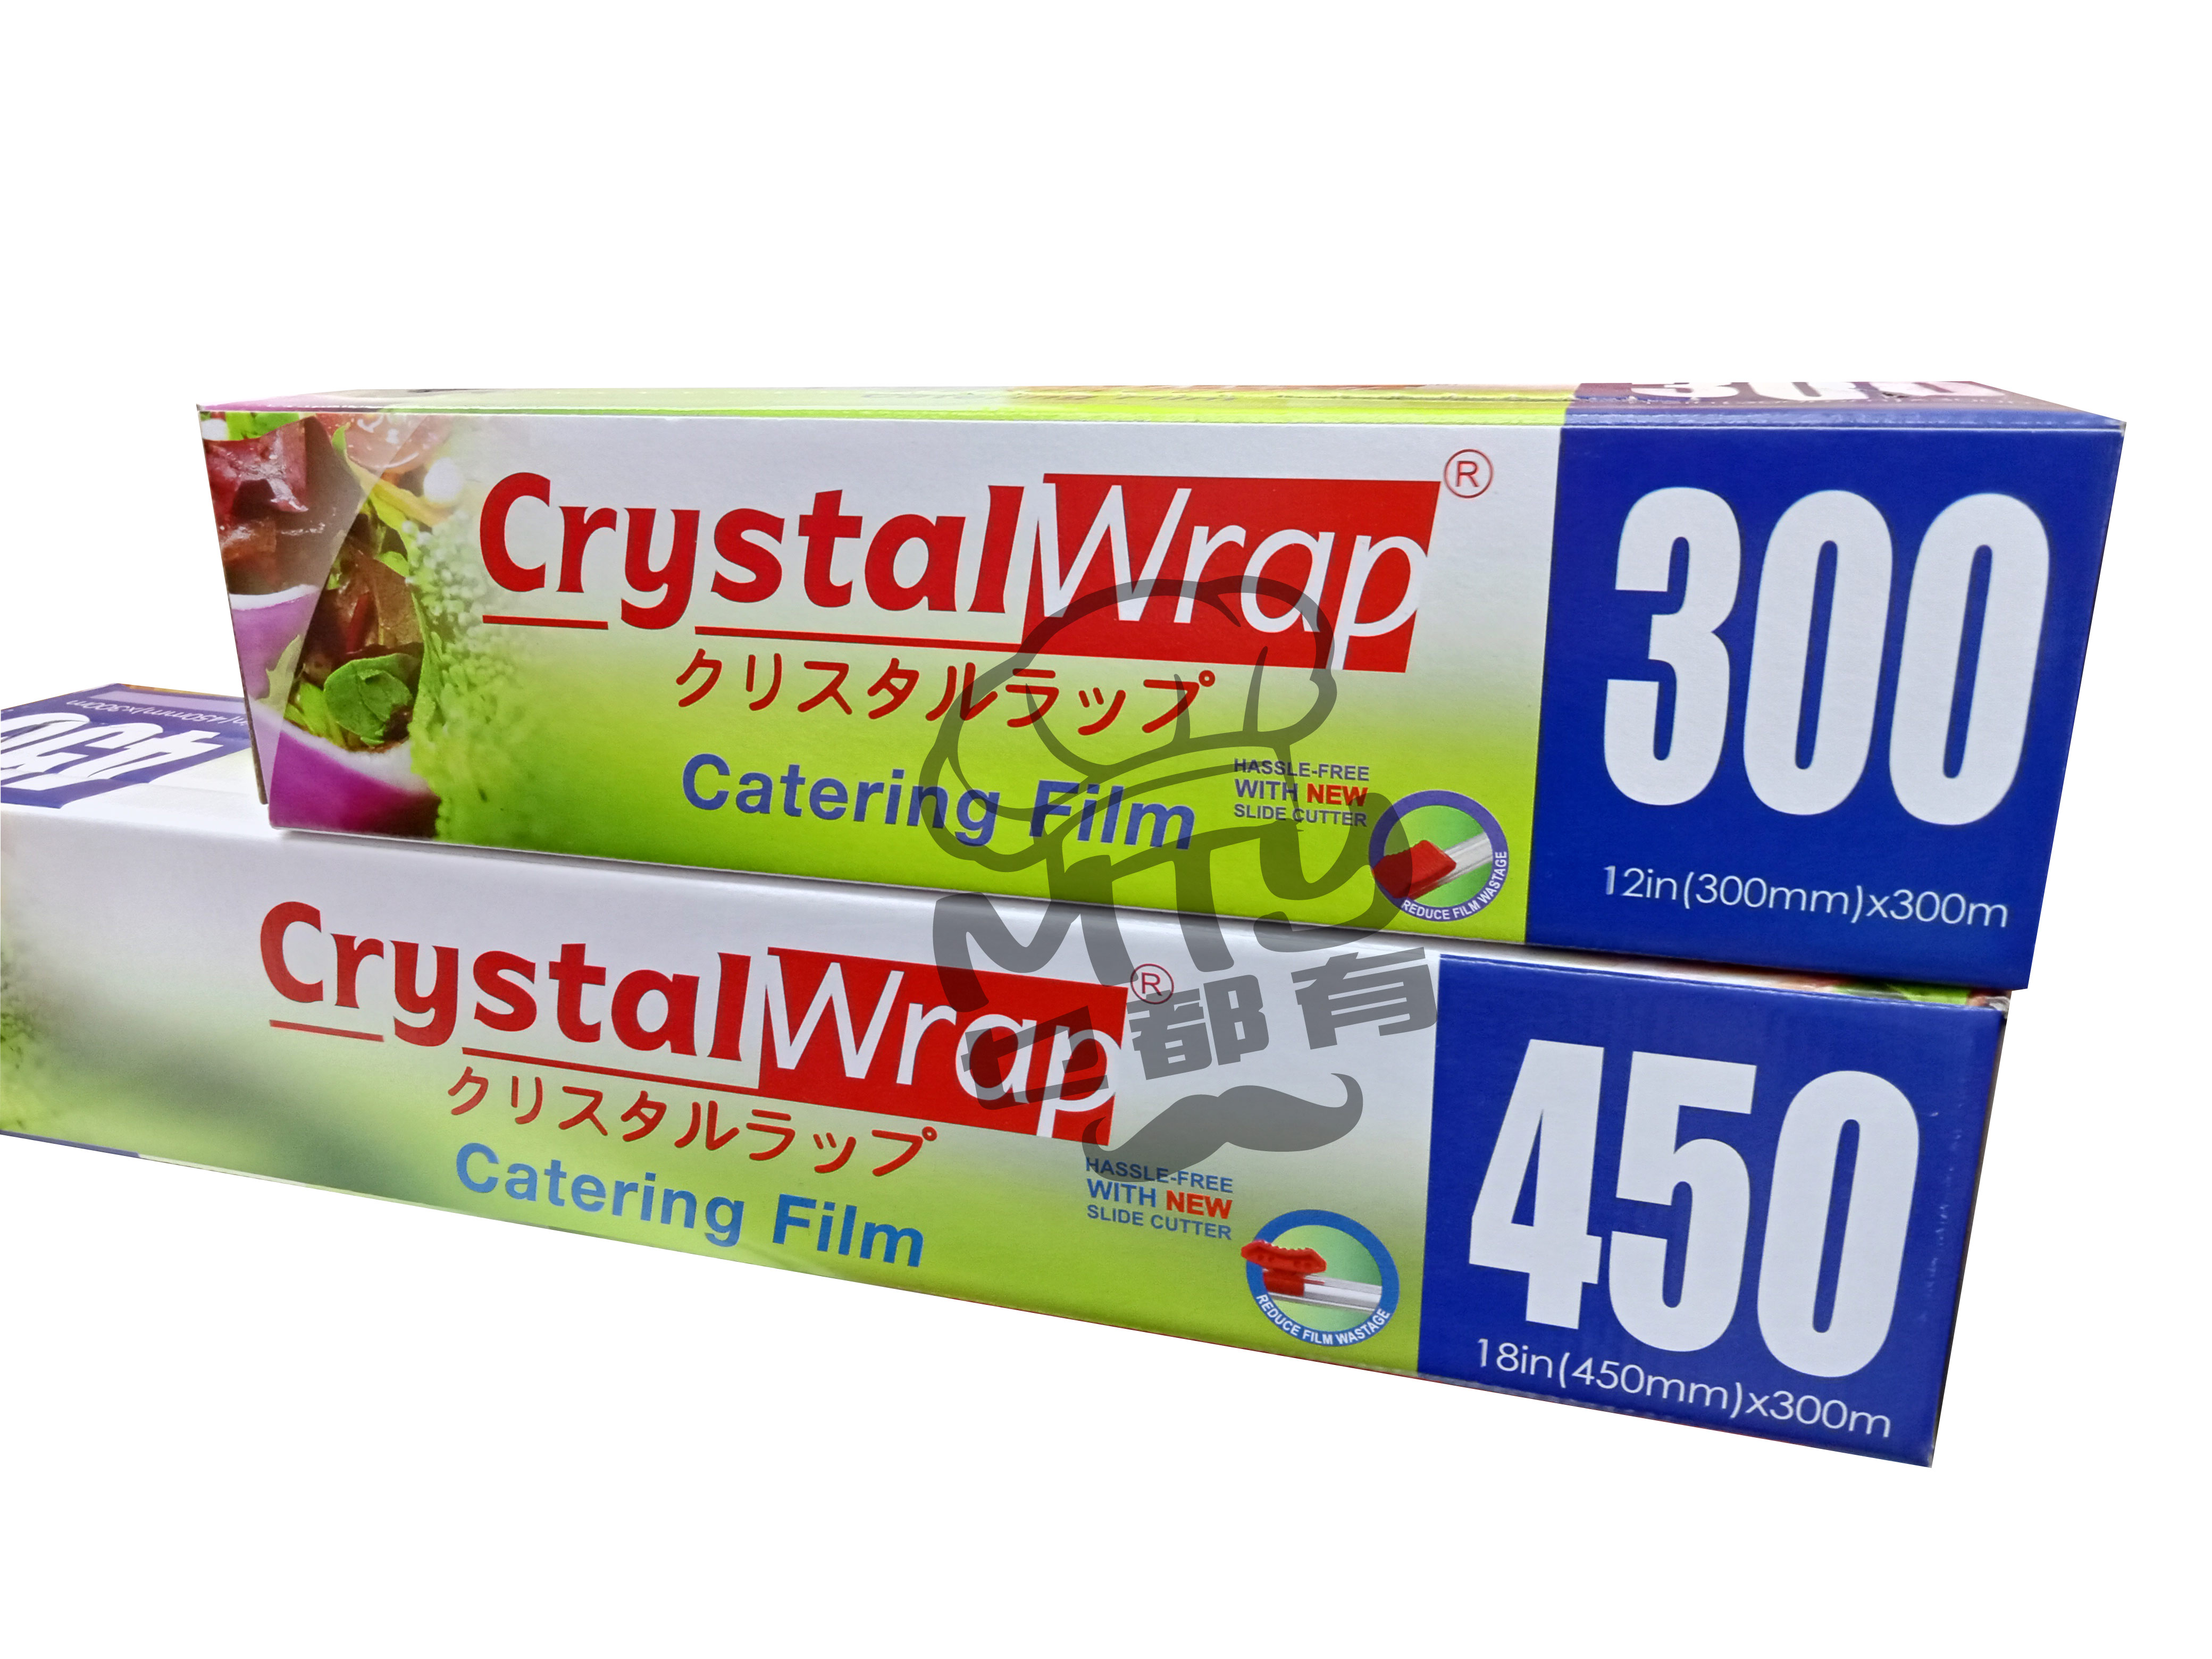 CW Catering Film (Cutter) 300mm (12inches)